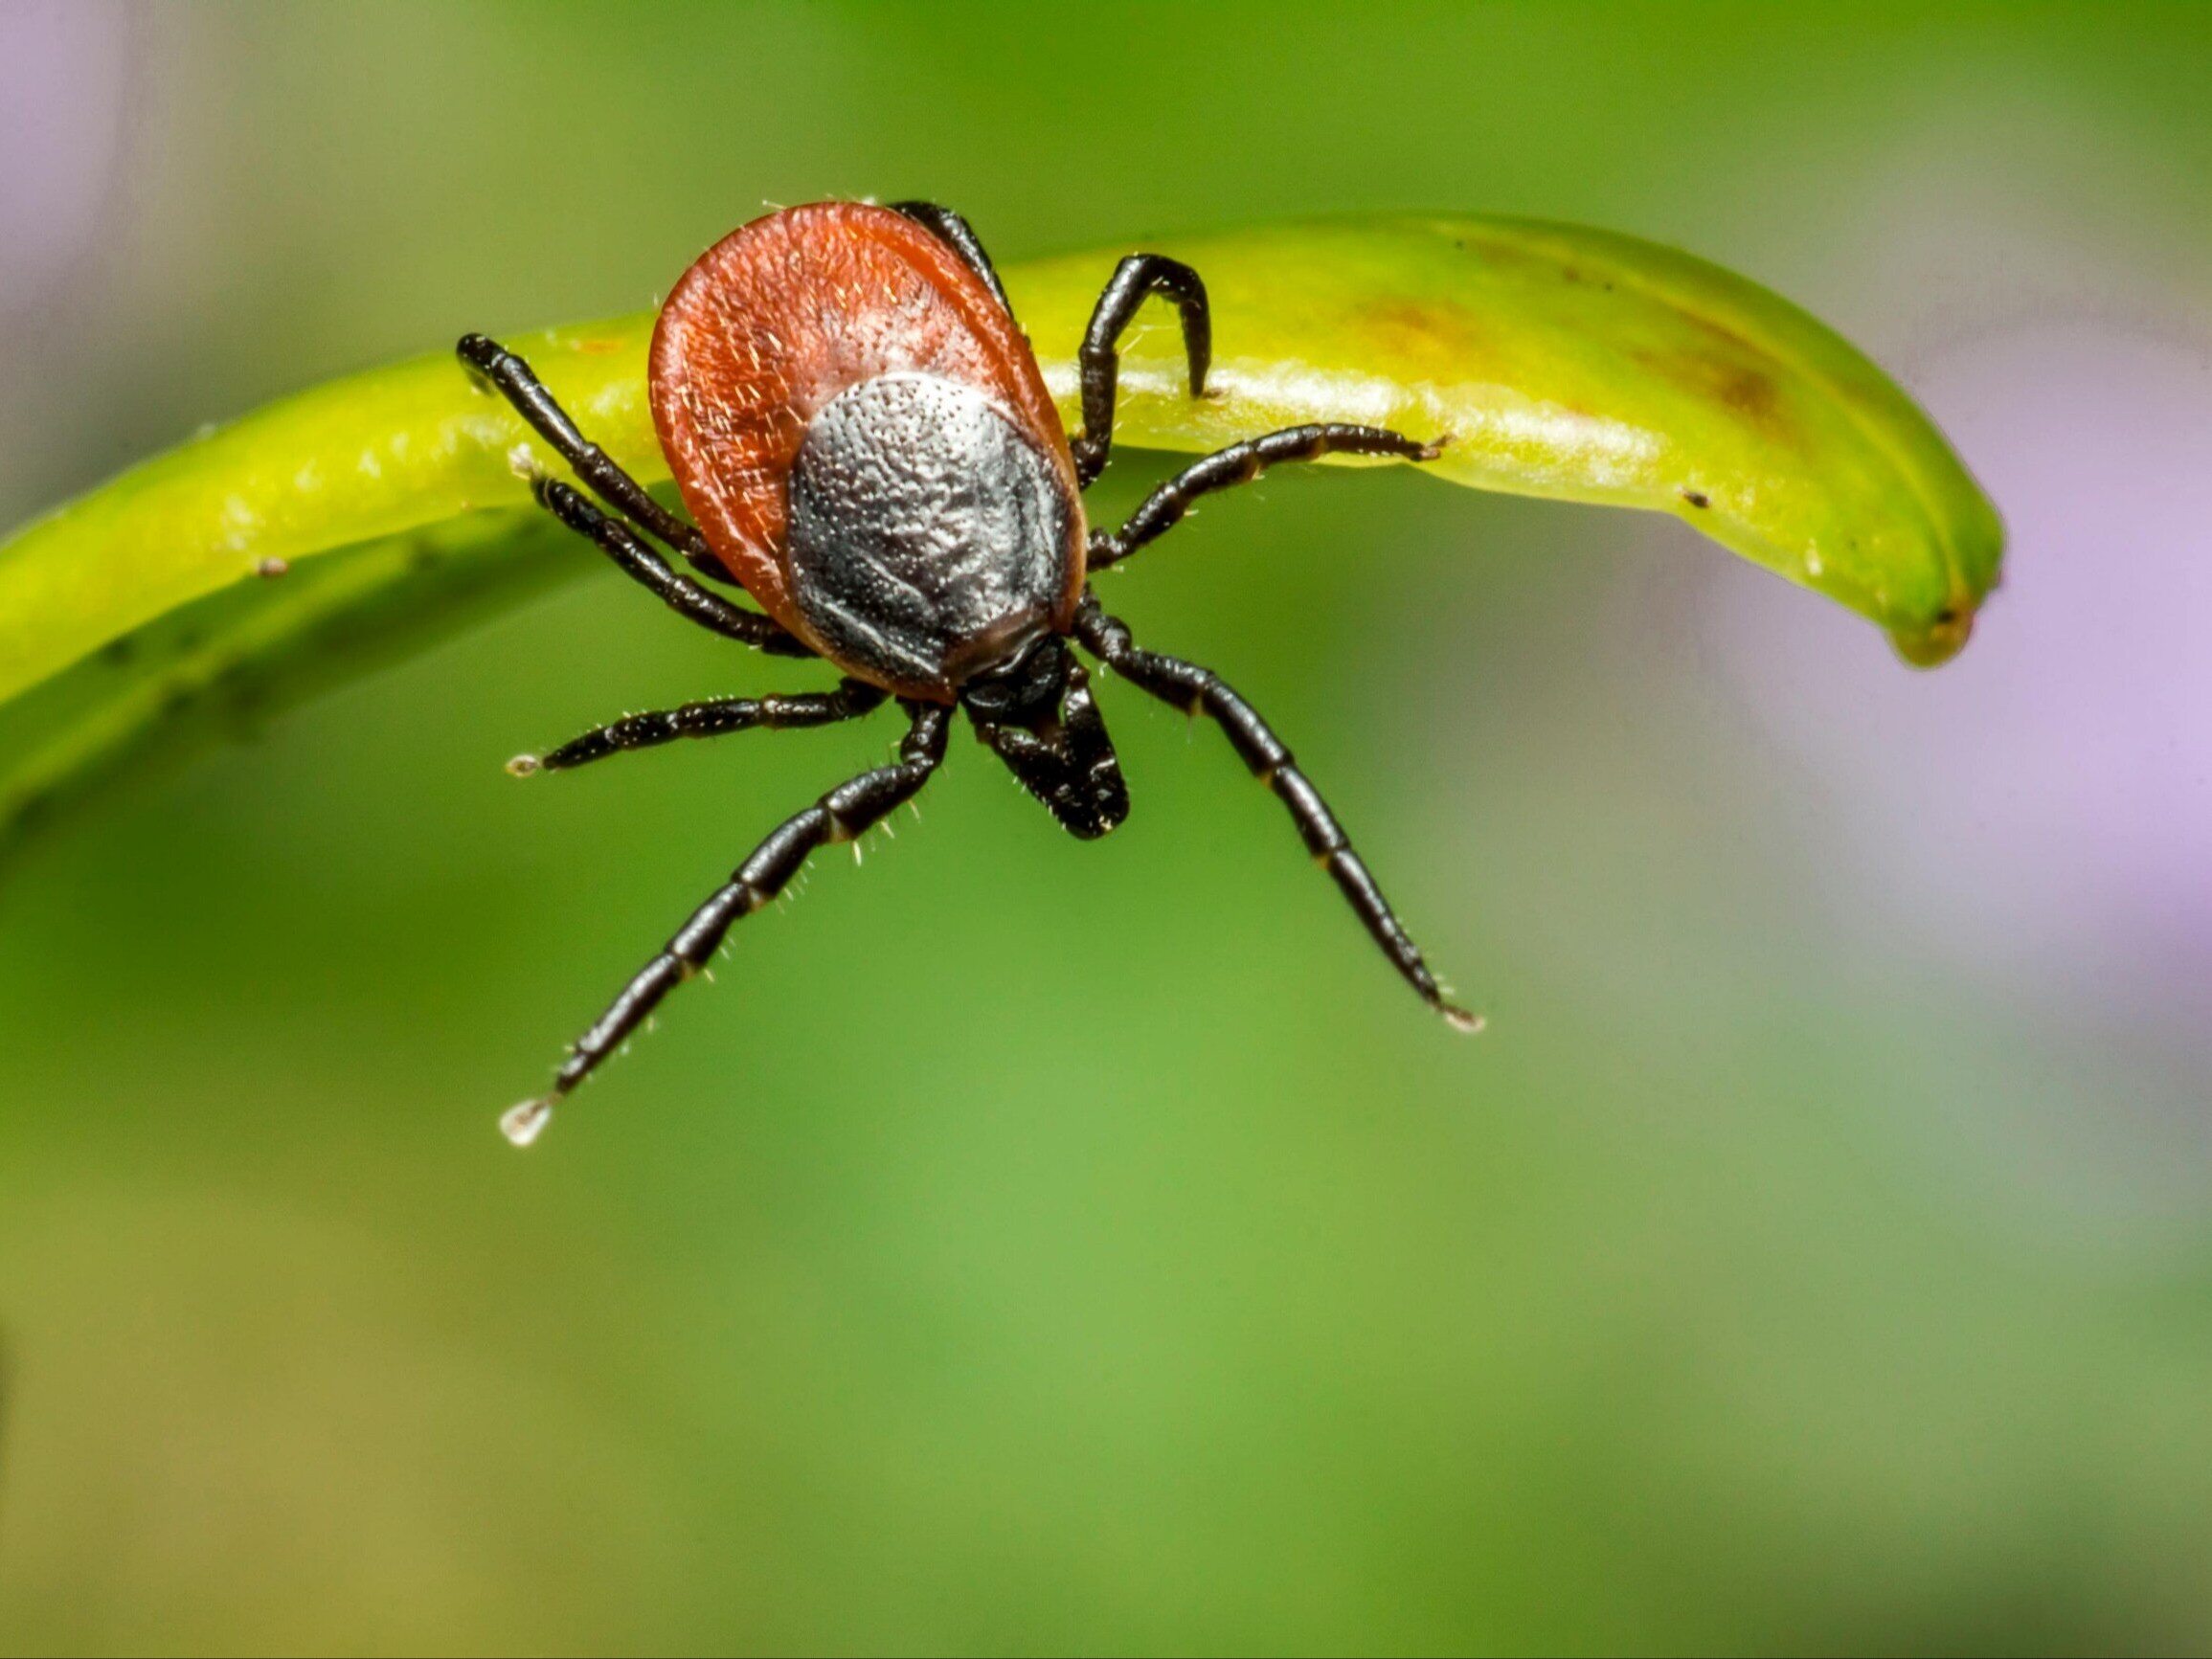 Researchers have discovered a new species of tick. It could be very dangerous.